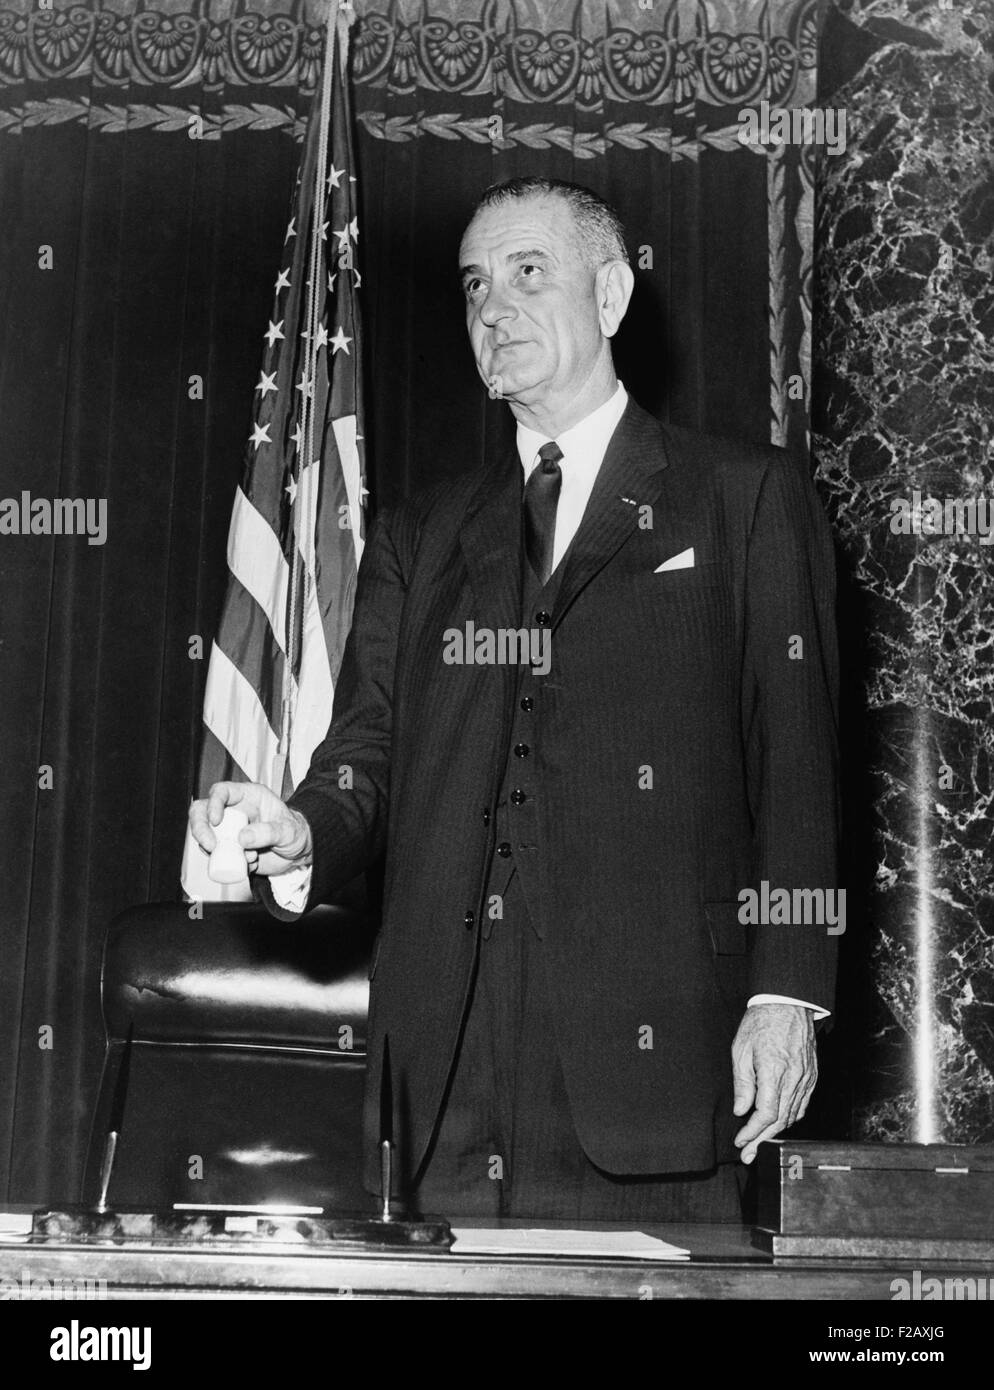 Vice President Lyndon Johnson, on rostrum of the Senate, in 1961. Johnson hoped to have a significant role coordinating between Stock Photo